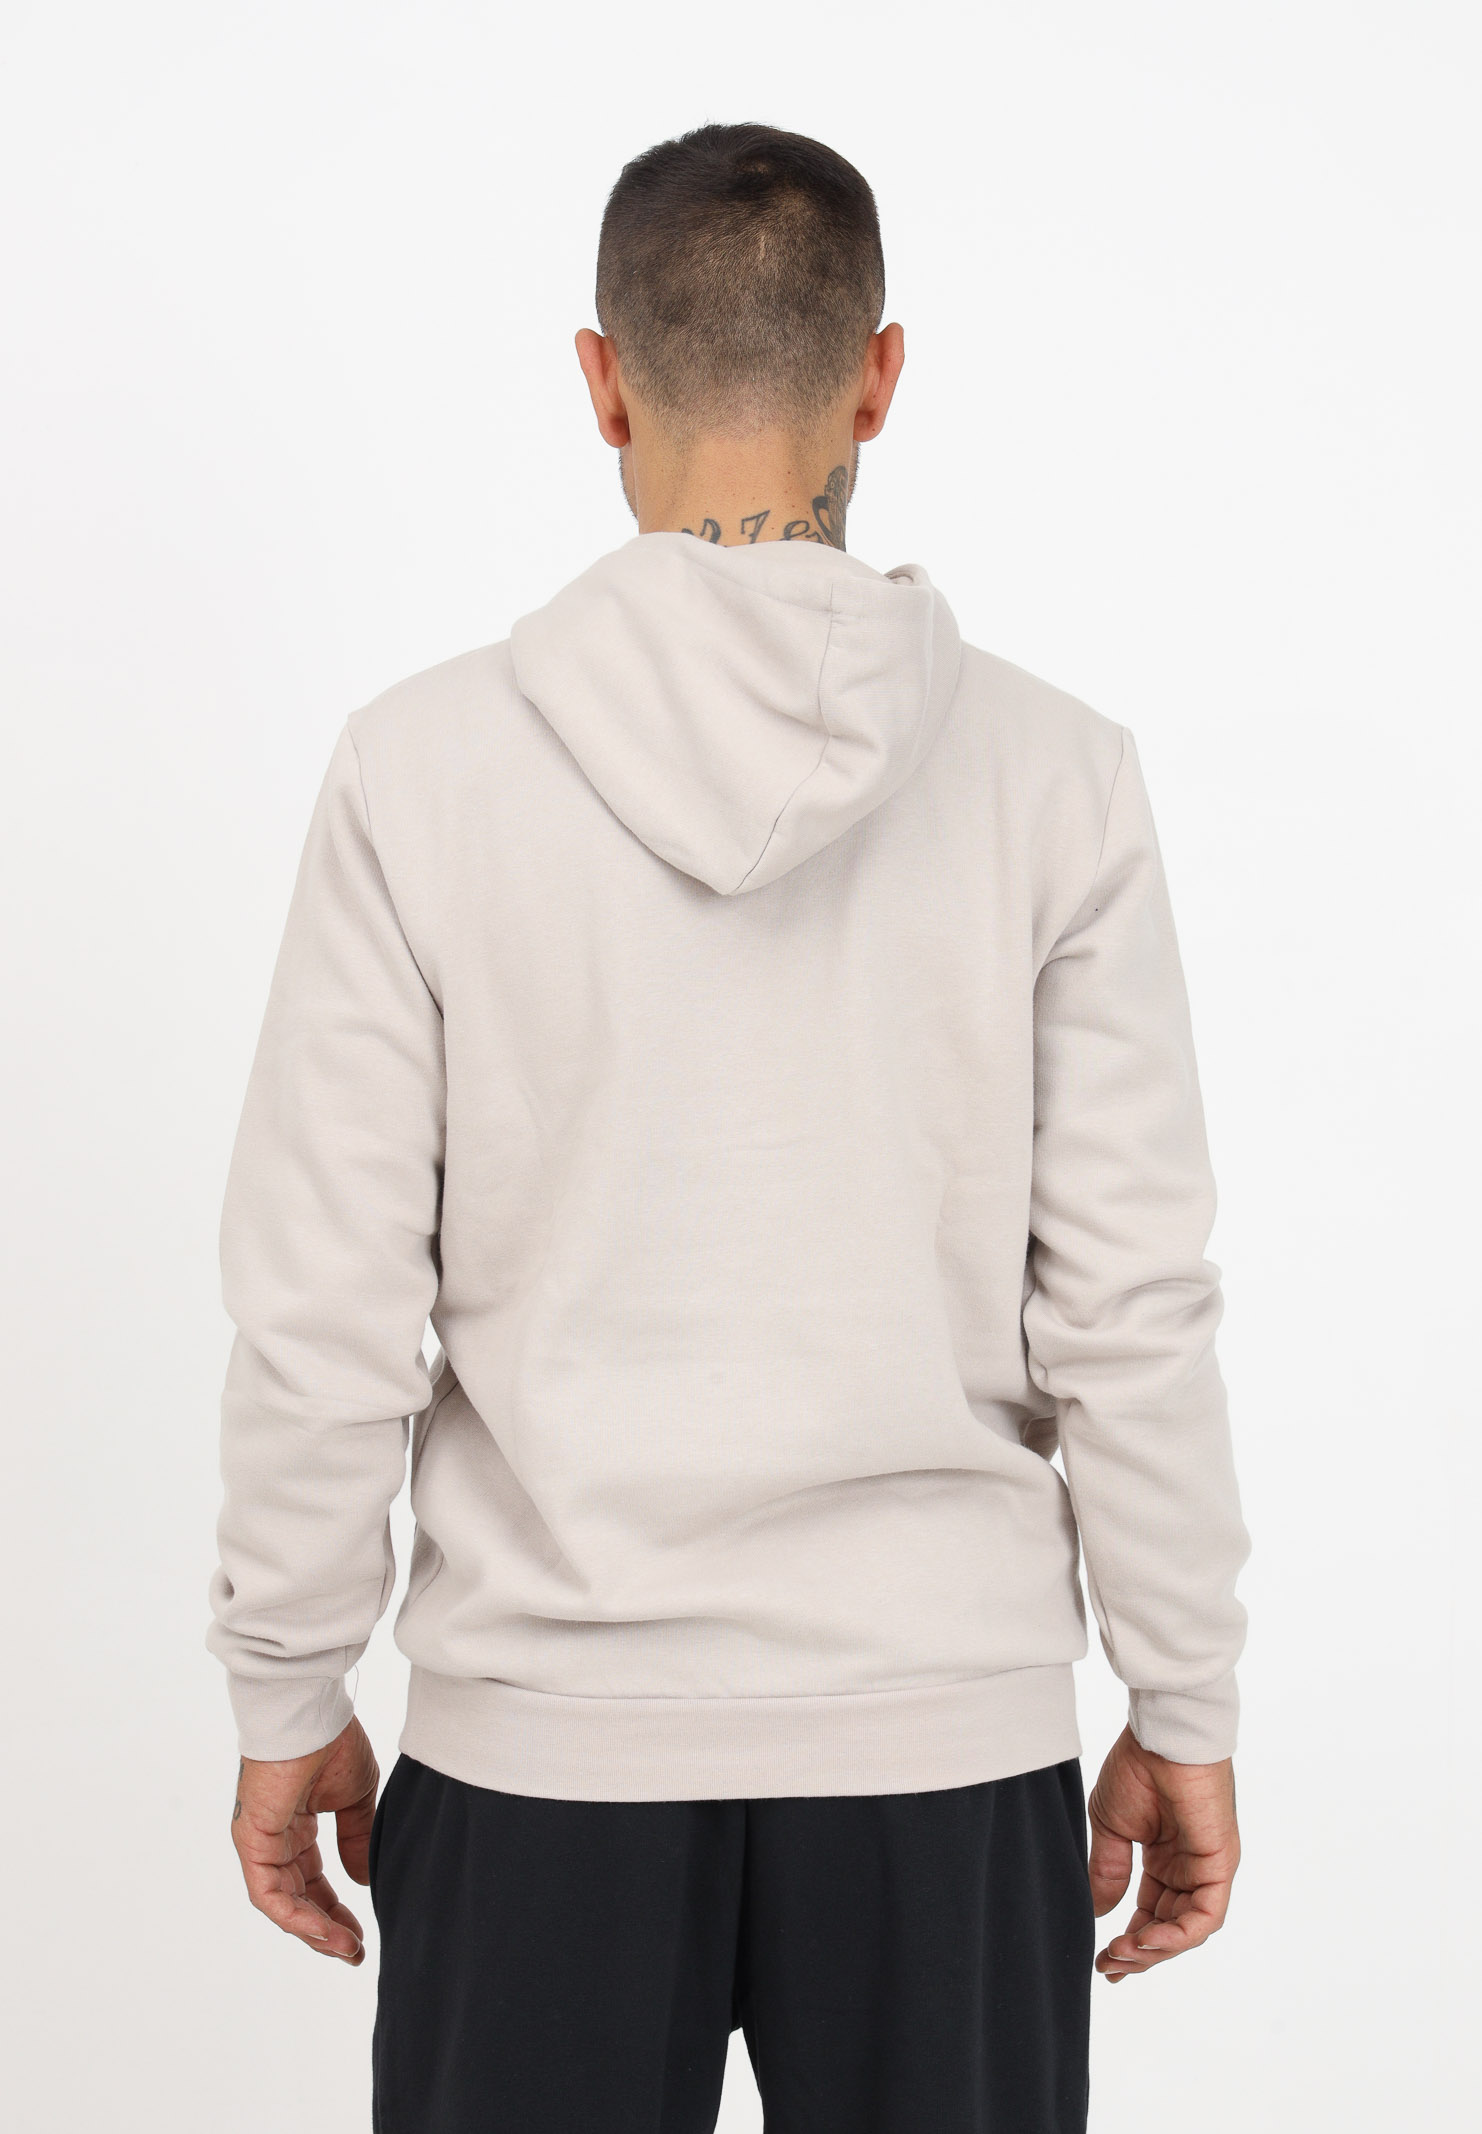 Beige sweatshirt with logo embroidery and hood for men ADIDAS PERFORMANCE | IL3294.